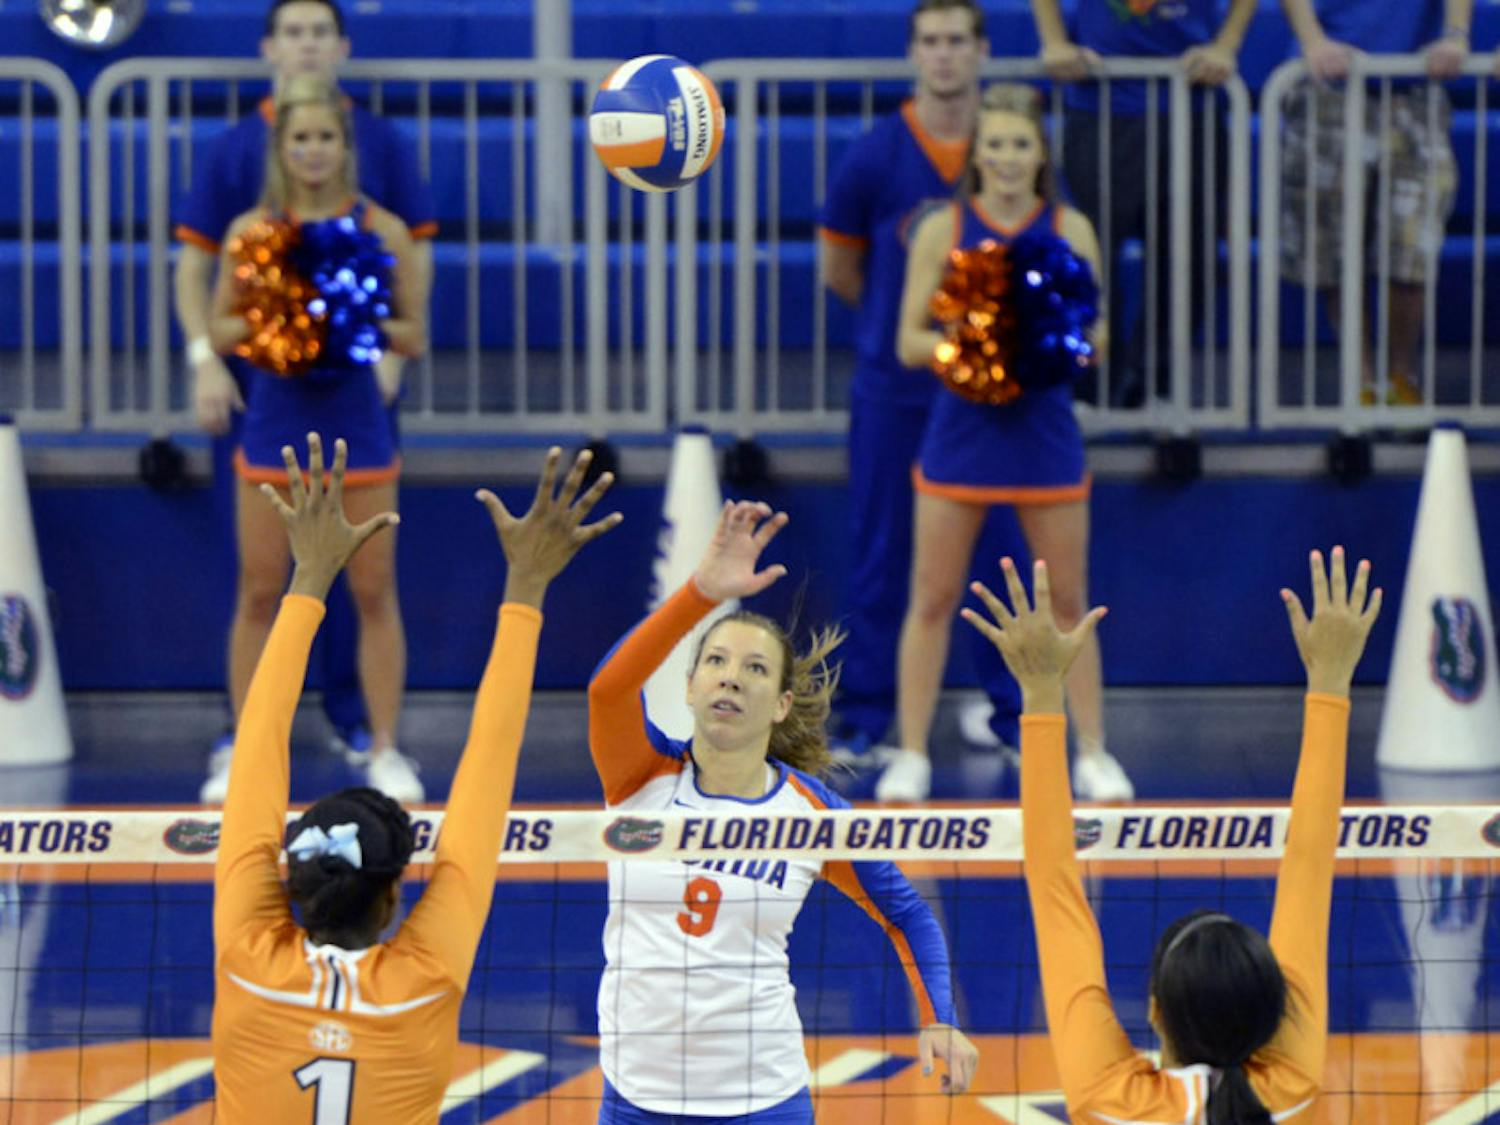 Ziva Recek reaches for the ball during Florida’s three-set victory against Tennessee on Oct. 27 in the O’Connell Center.